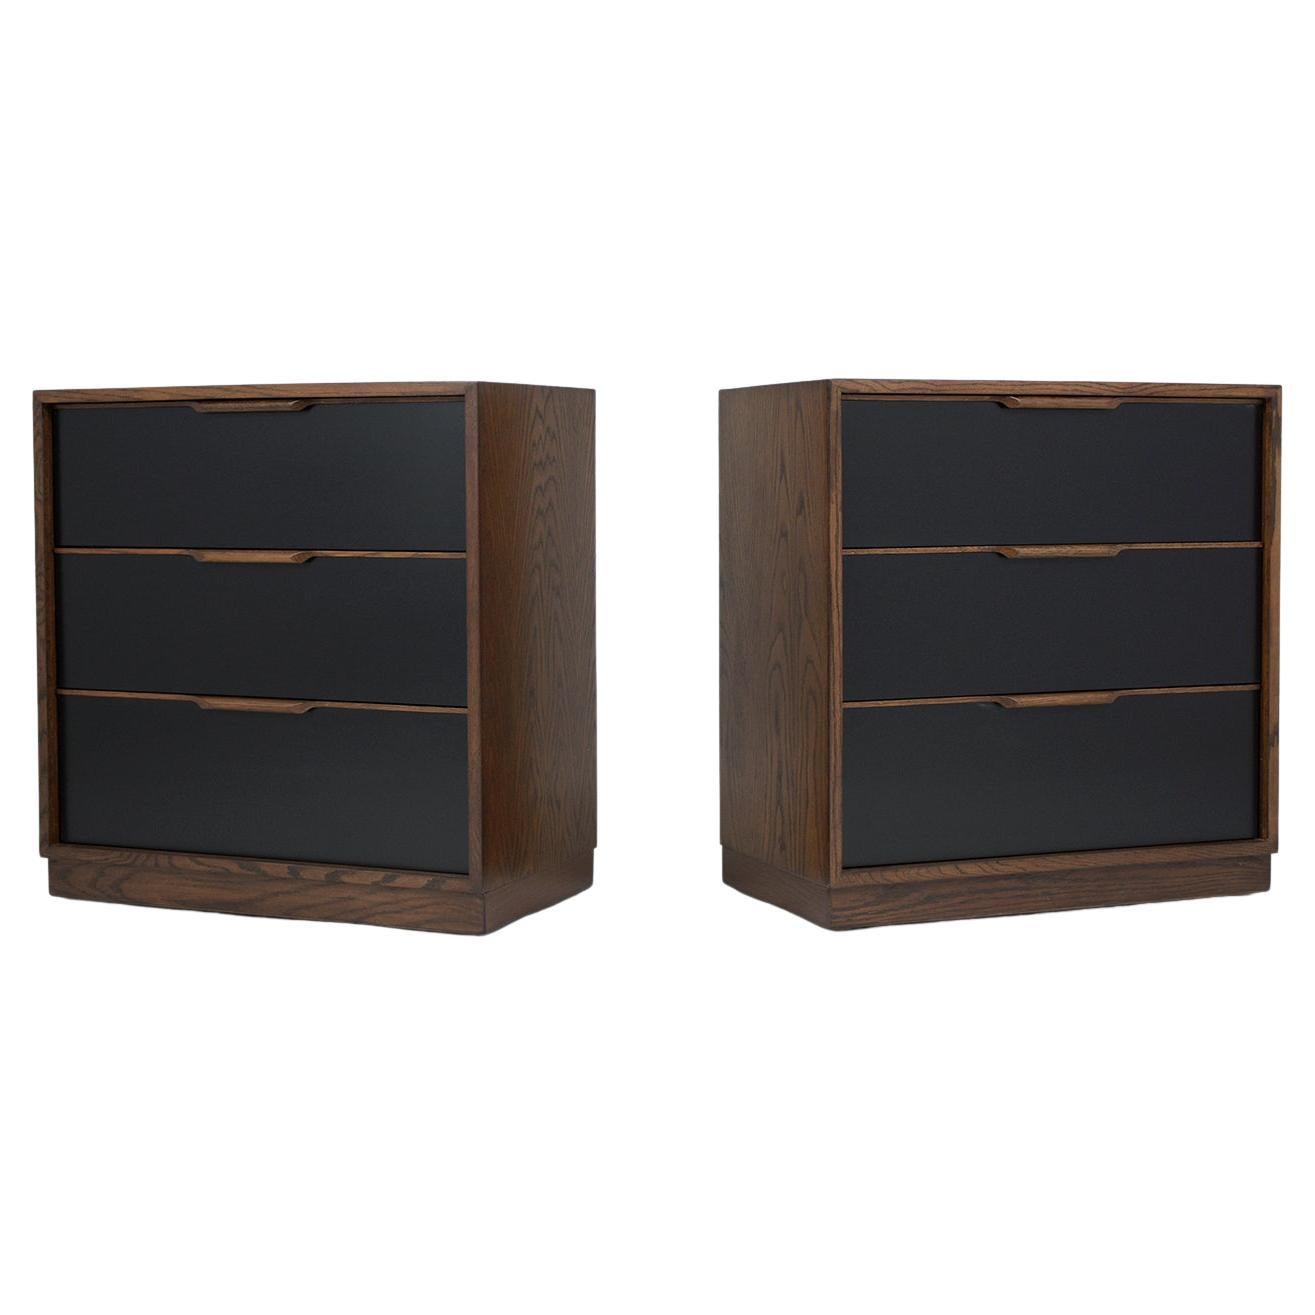 Pair of  Mid-Century Modern Danish Walnut Chests with Black Lacquer Finish For Sale